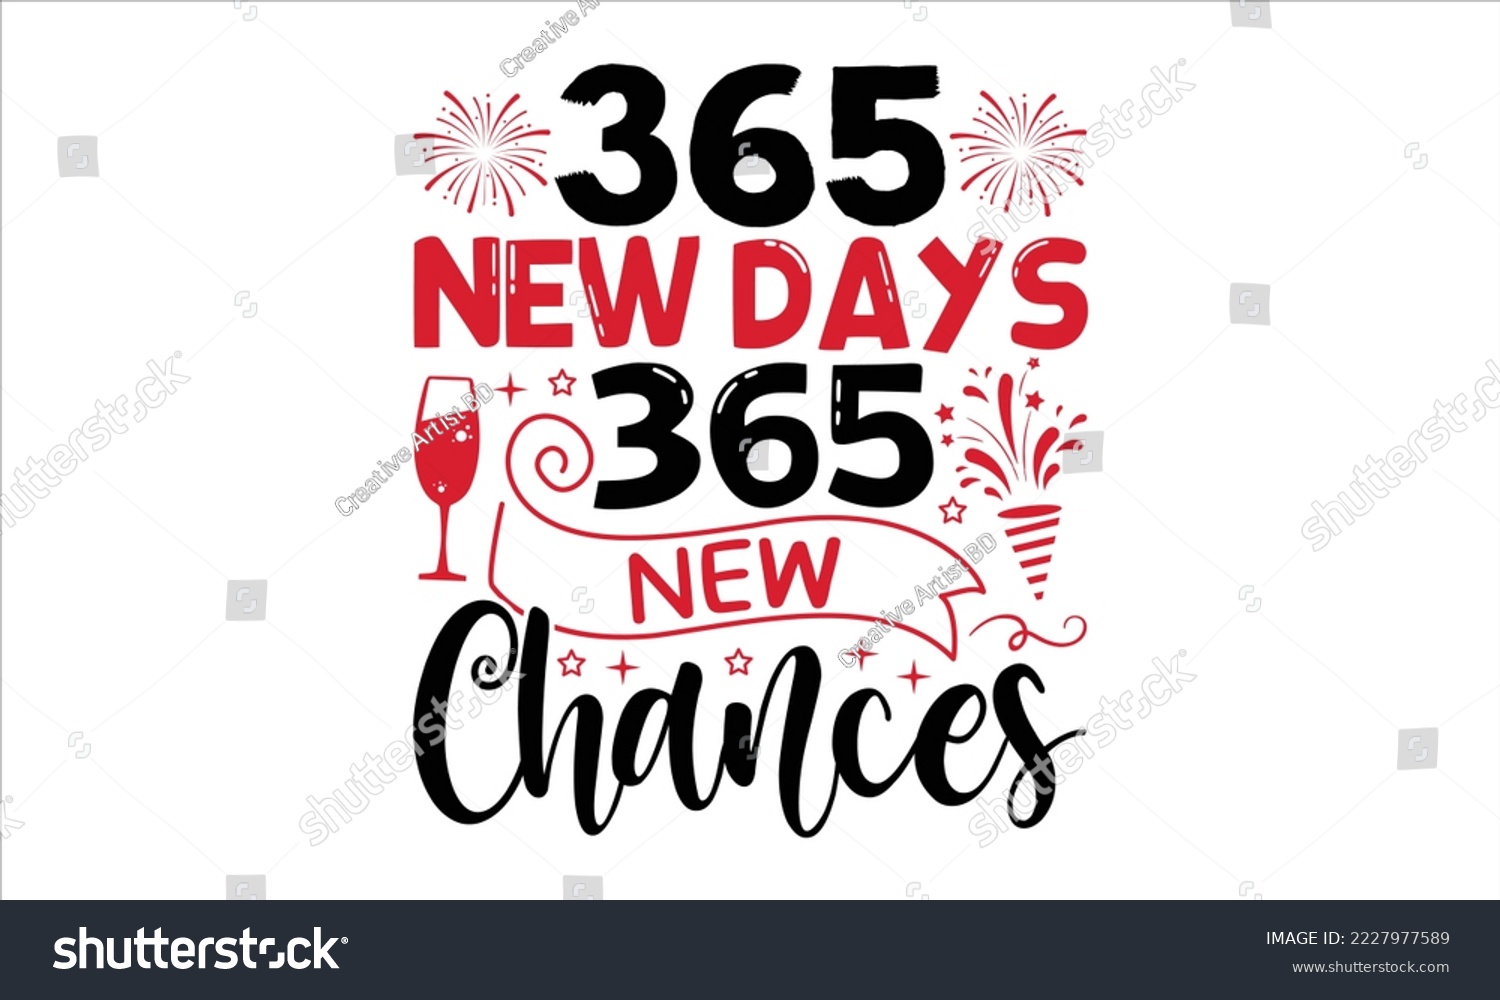 SVG of 365 New Days 365 New Chances - Happy New Year  T shirt Design, Hand drawn vintage illustration with hand-lettering and decoration elements, Cut Files for Cricut Svg, Digital Download svg